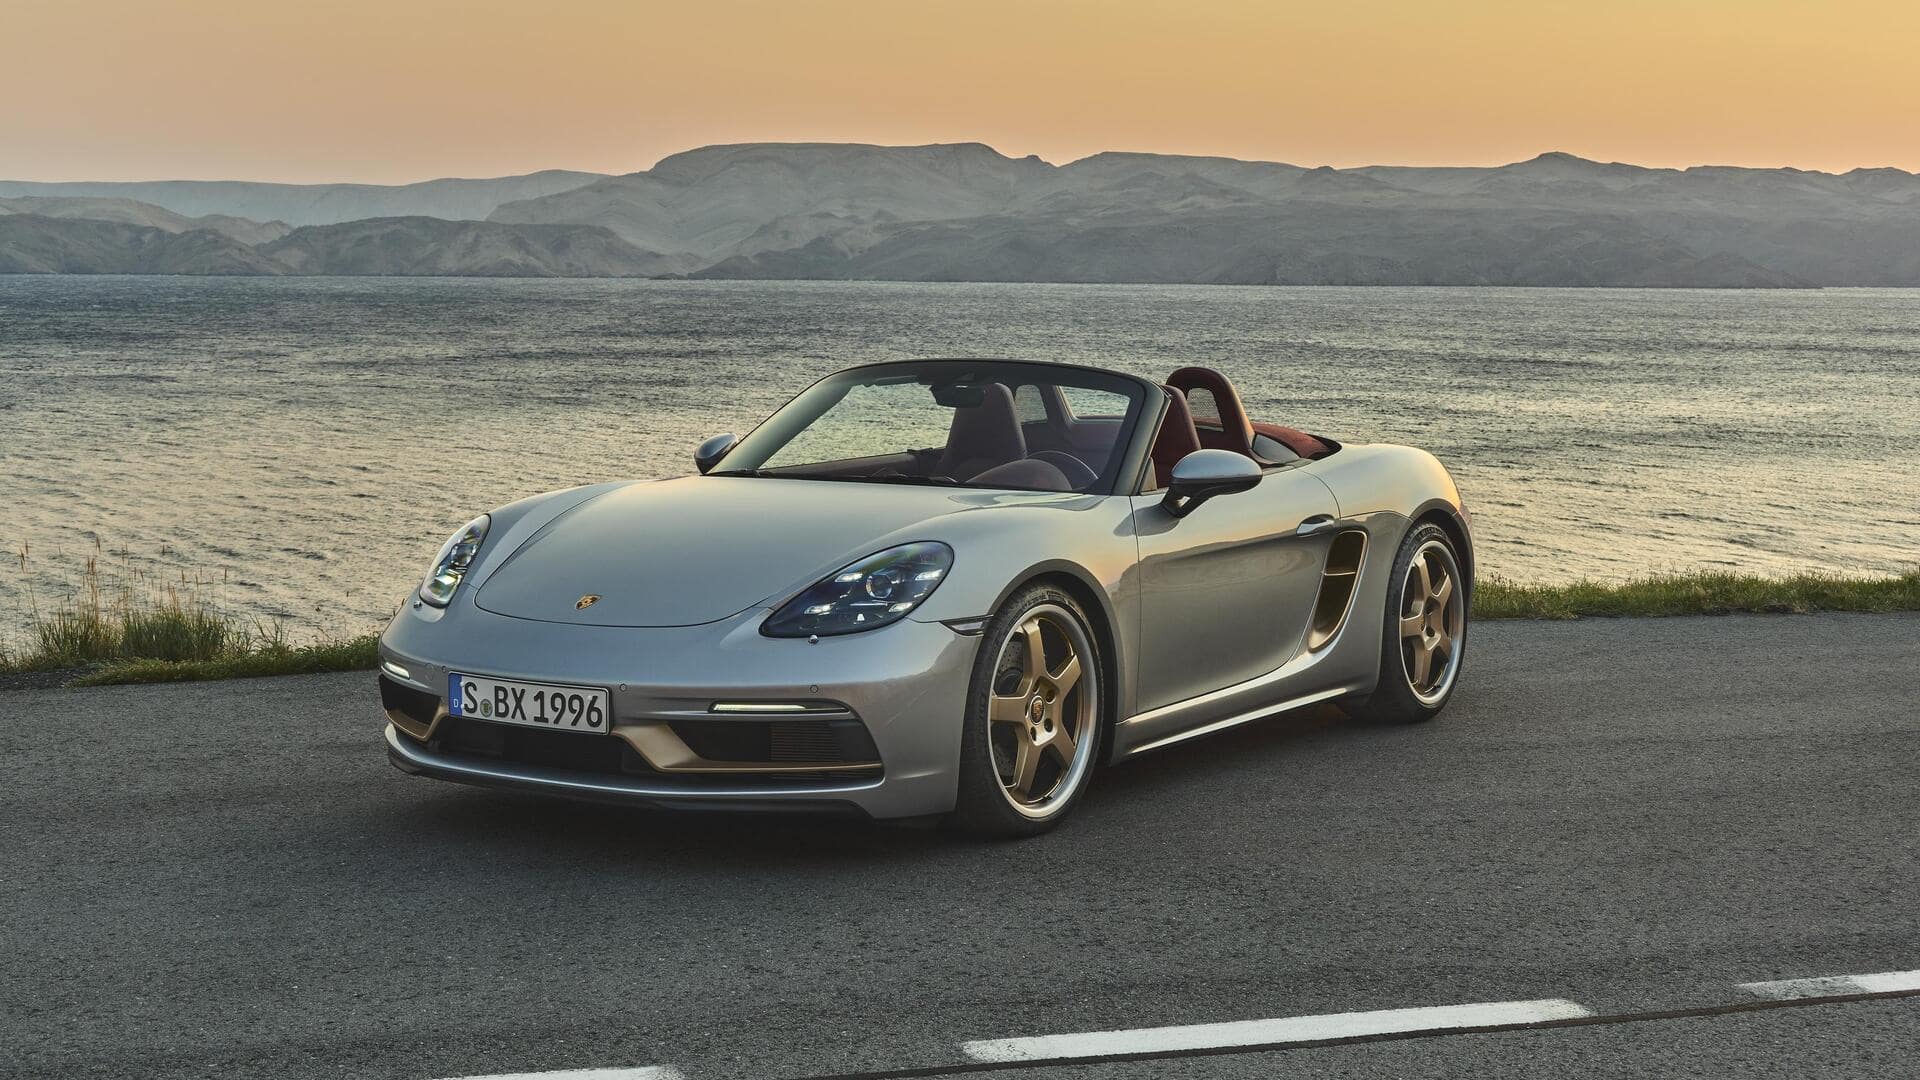 Porsche Boxster EV prototype spied testing: What to expect